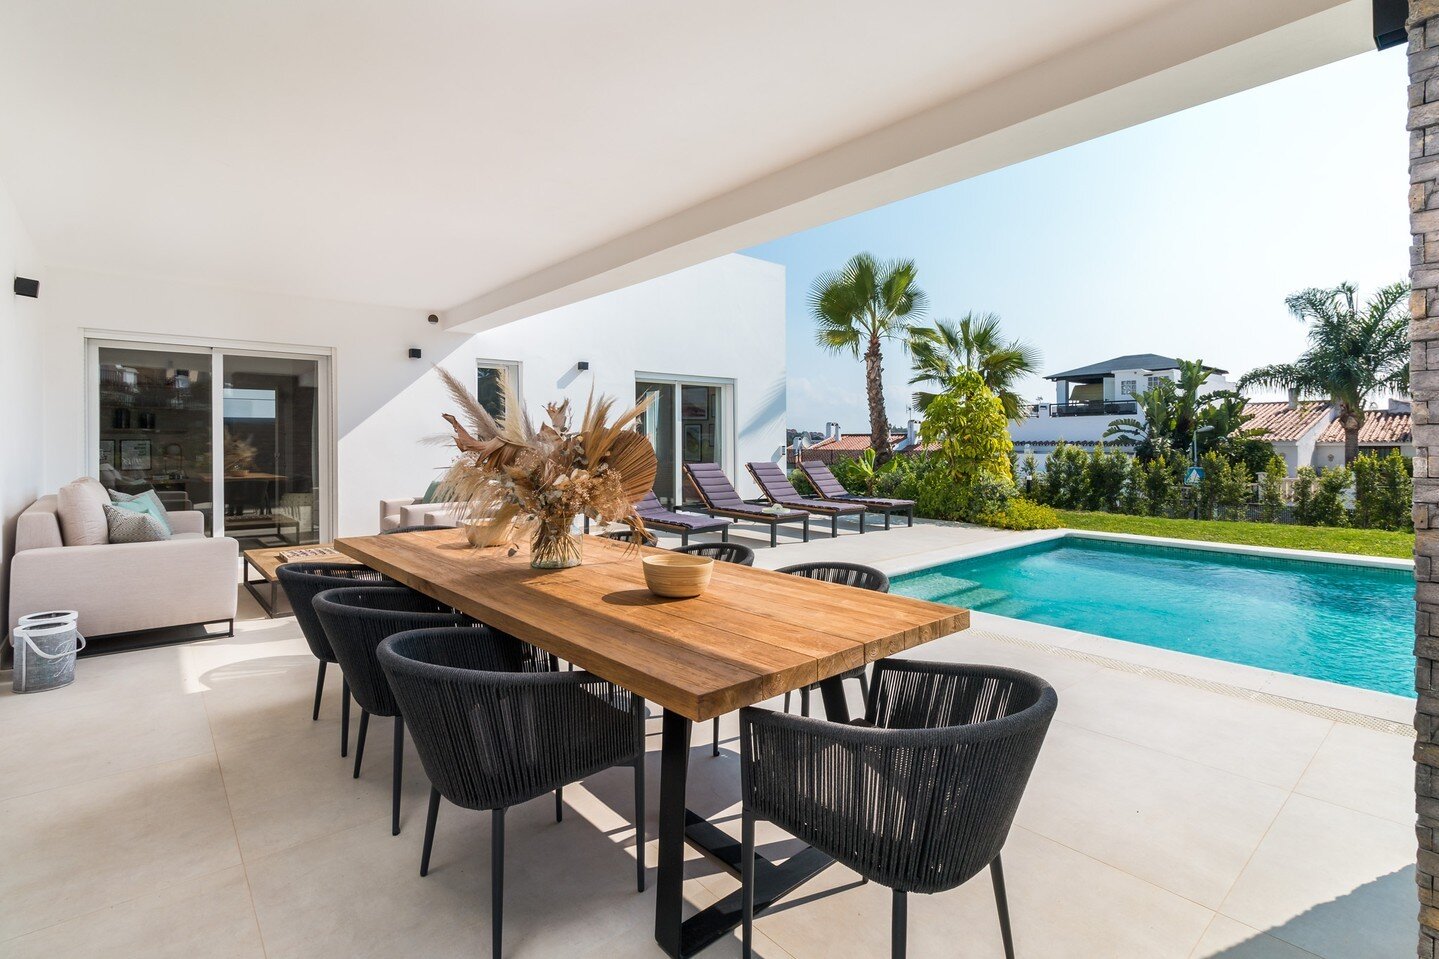 What a magnificent long-weekend that was! 🌅🌊
We are feeling inspired this morning, with all of our minds on outdoor living, alfresco dining and refreshing our exterior spaces ahead of summer ☀️ Take a look at the details of this gorgeous project th